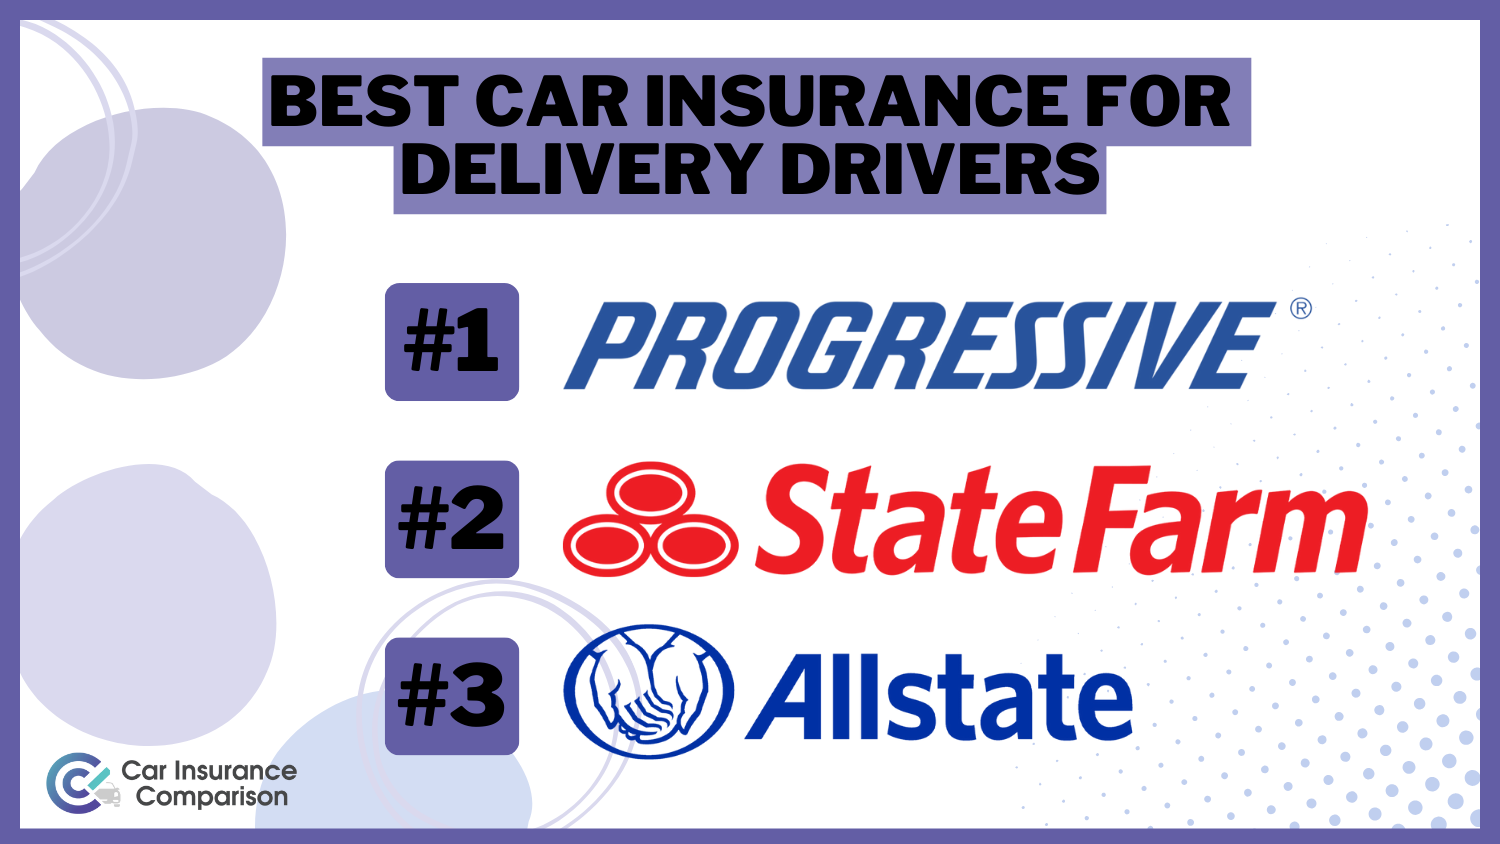 Best Car Insurance for Delivery Drivers: Progressive, State Farm, and Allstate